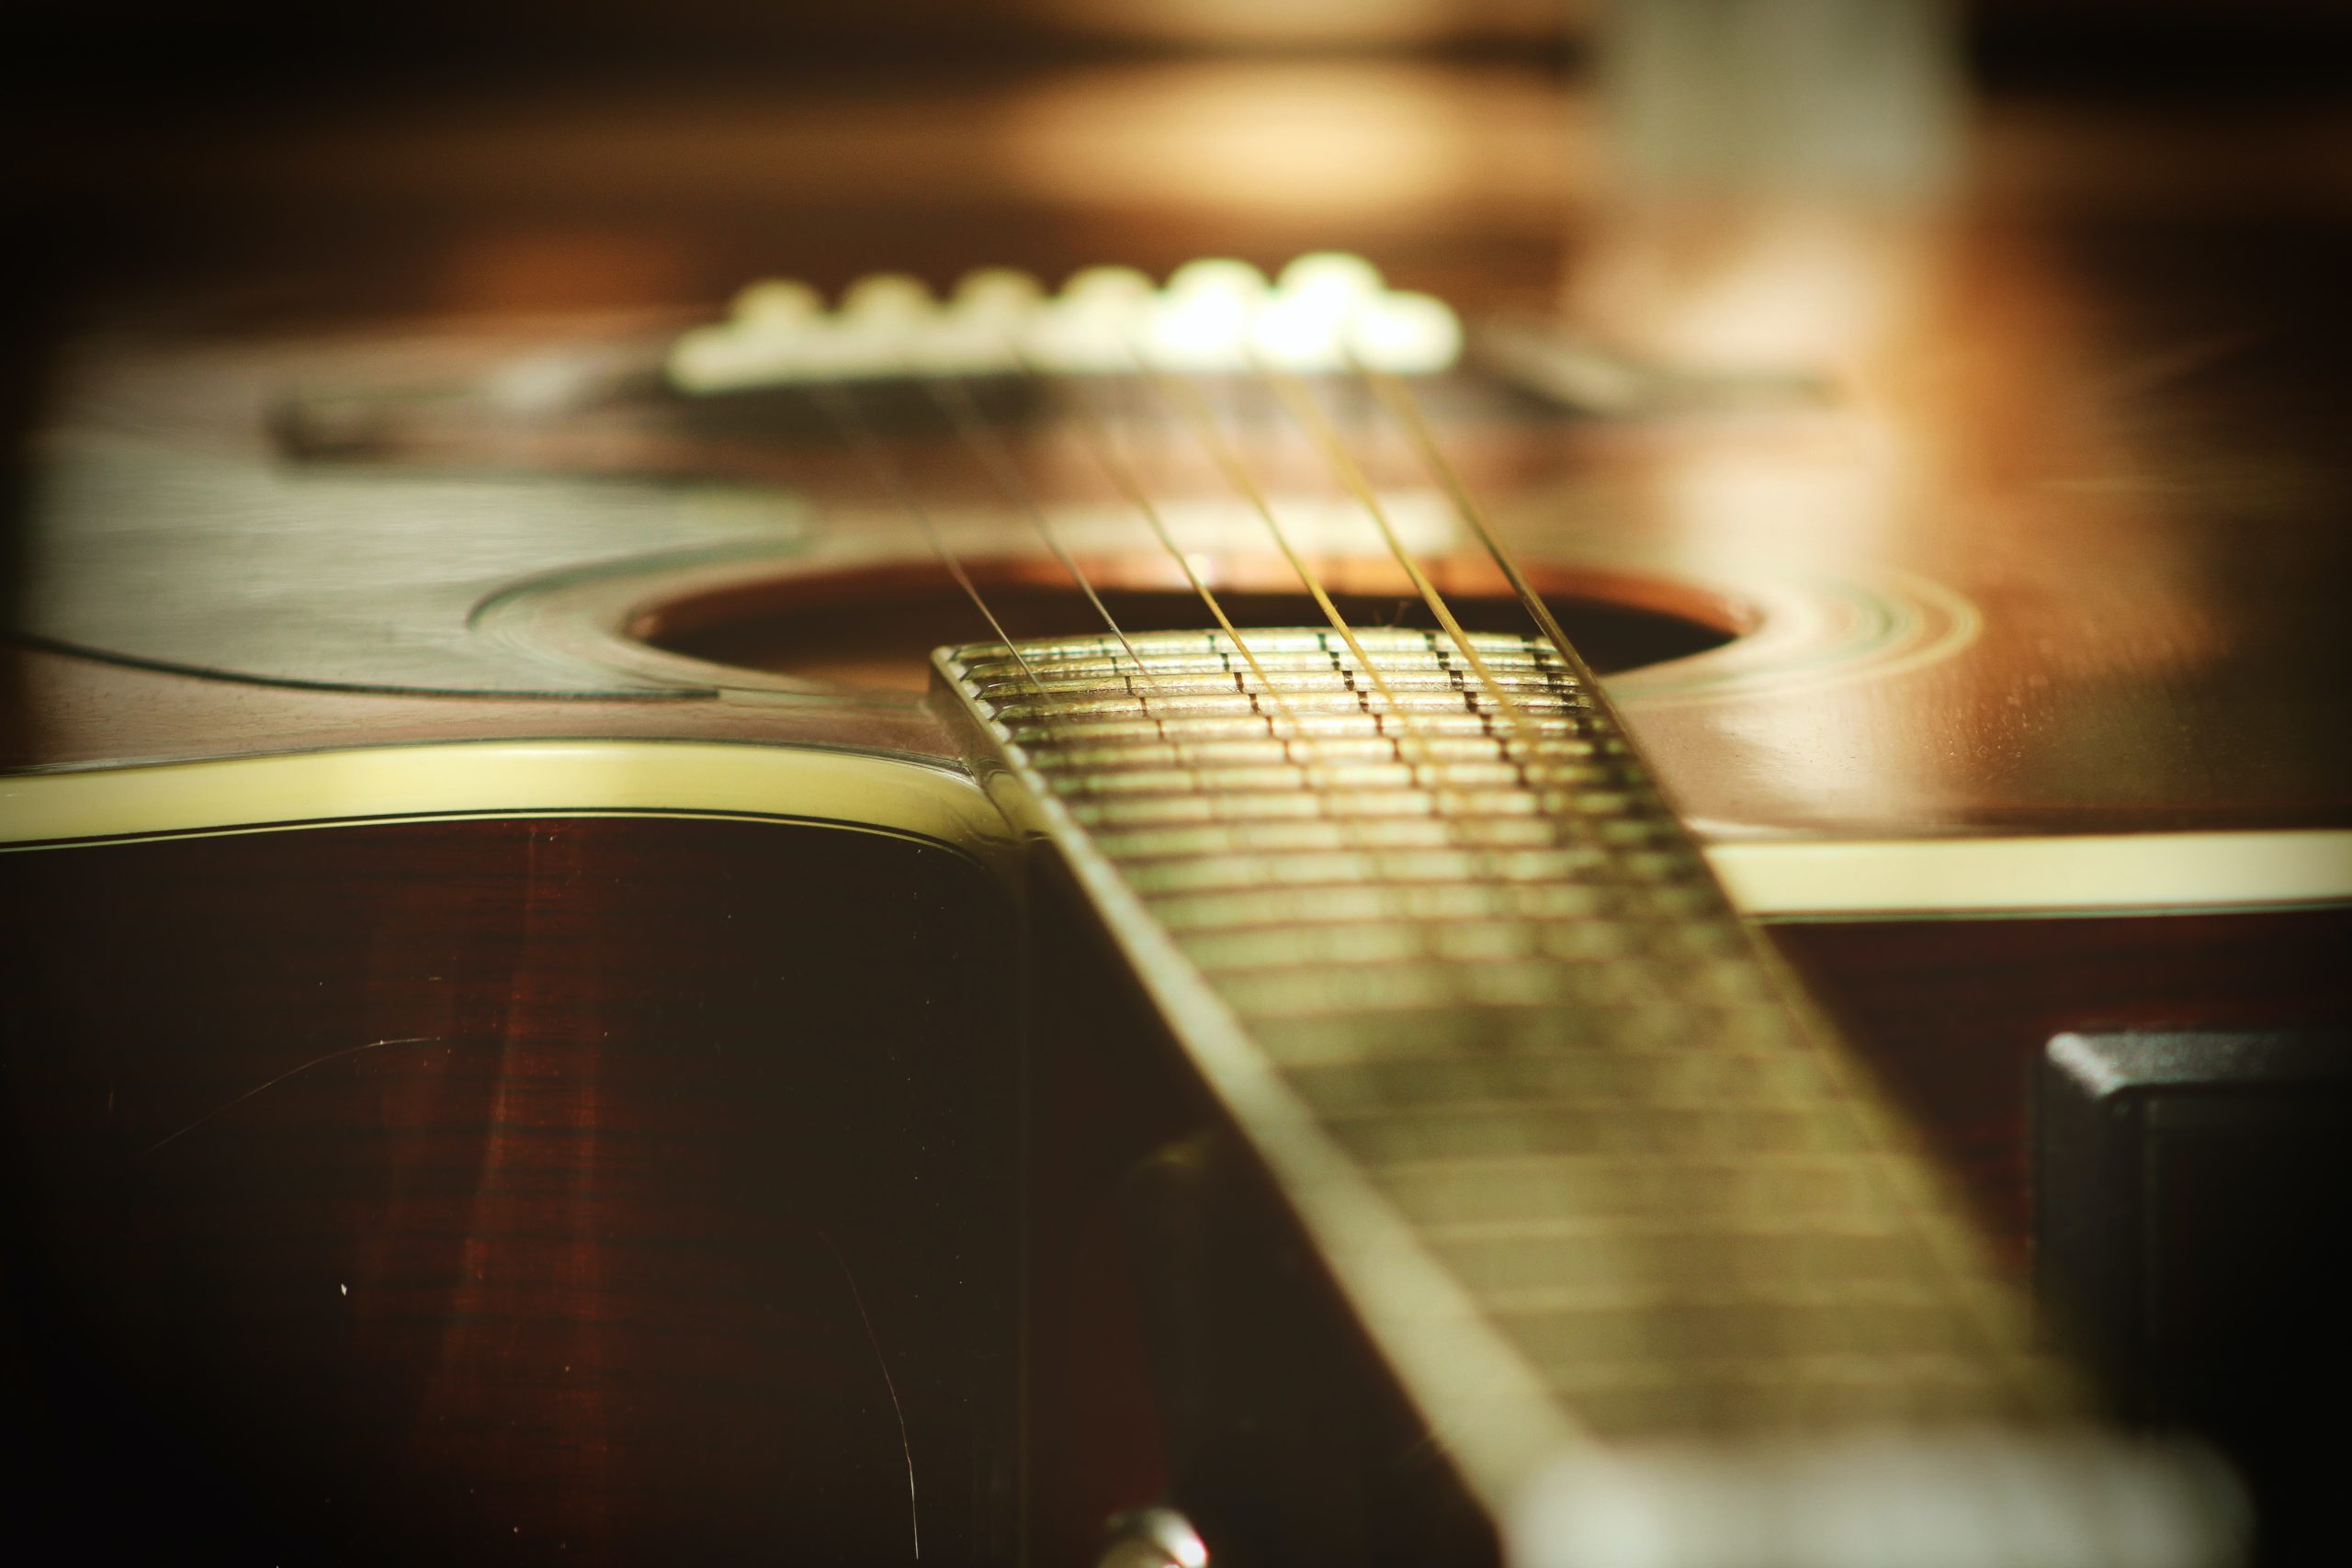 Close up photo of an acoustic guitar, looking down from the neck.